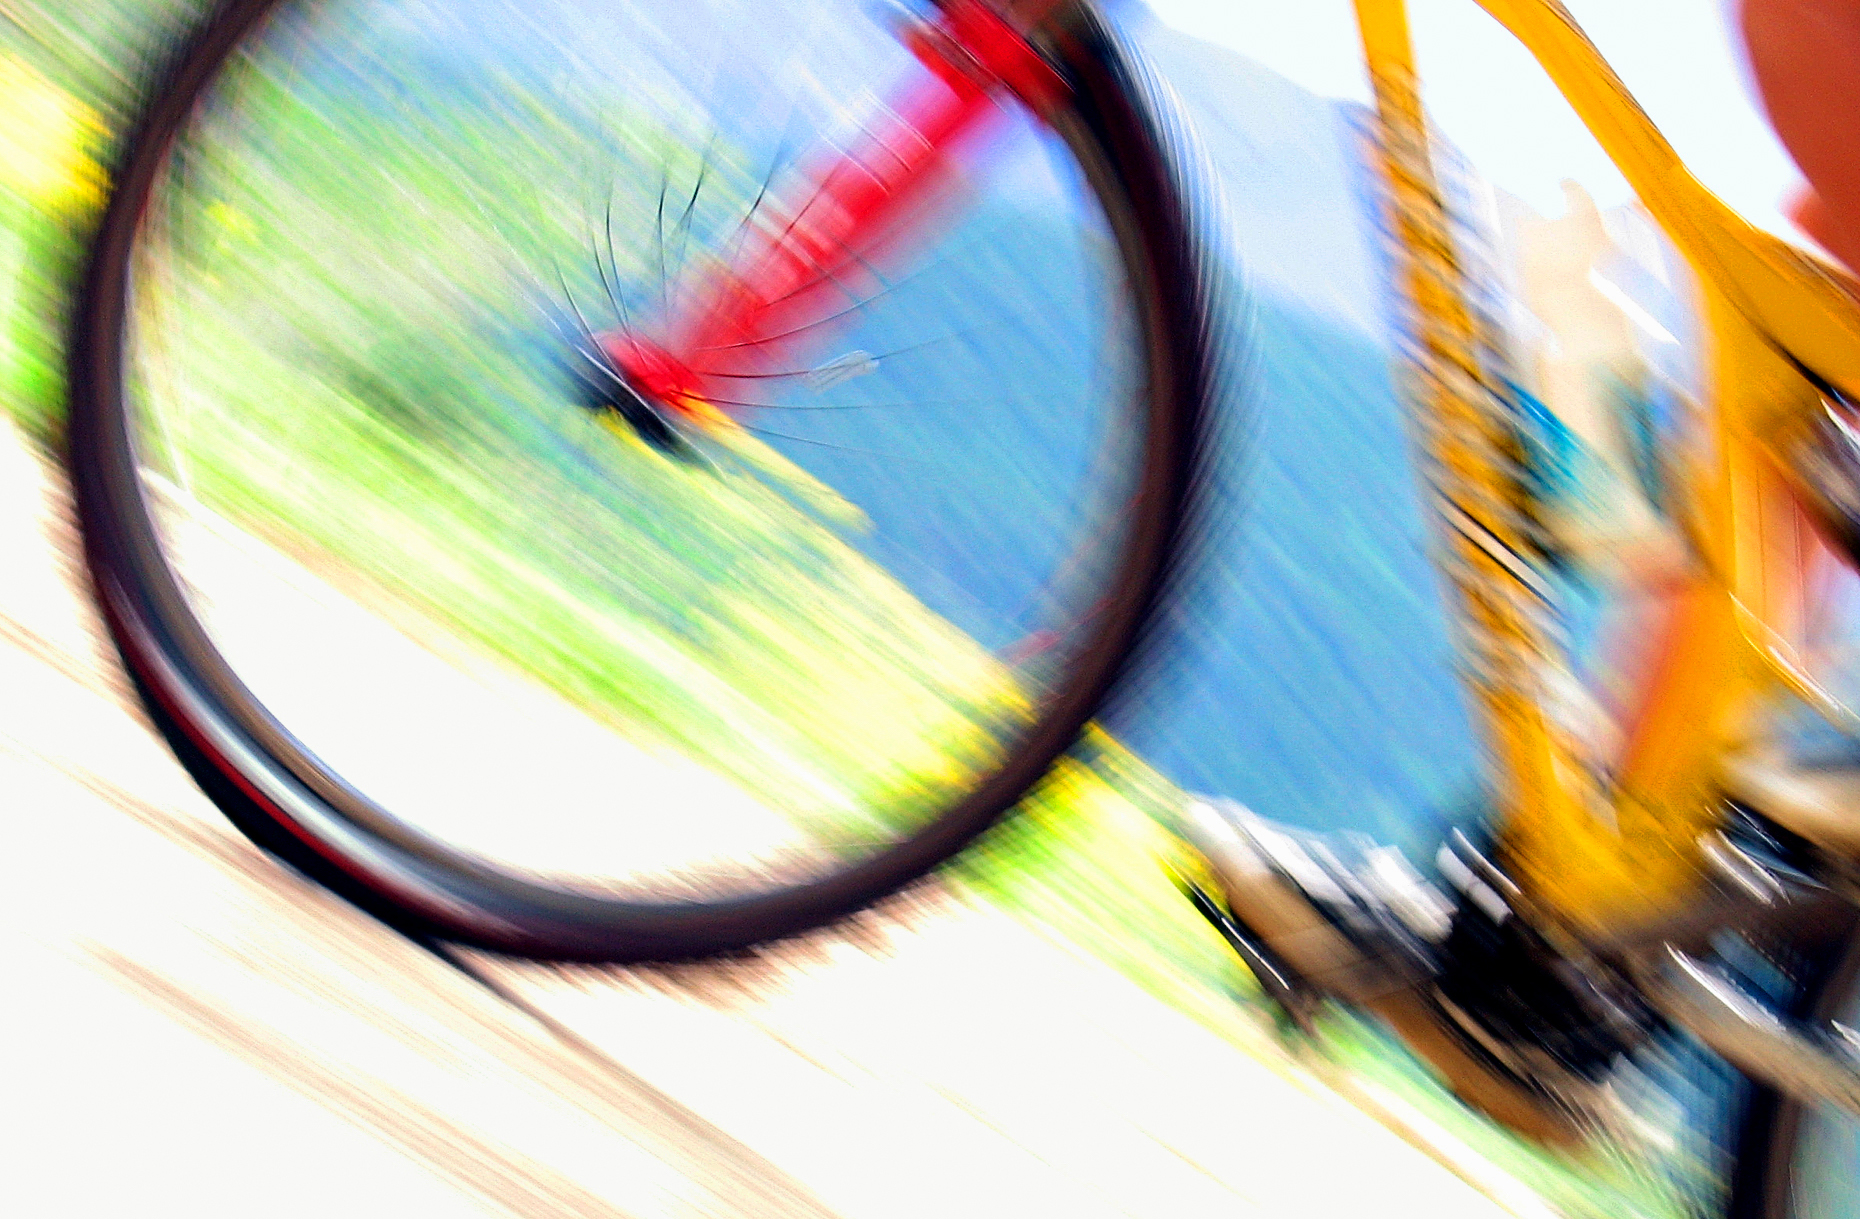 Abstract close up of a colorful front wheel of a mountain bike spinning in a blur of motion